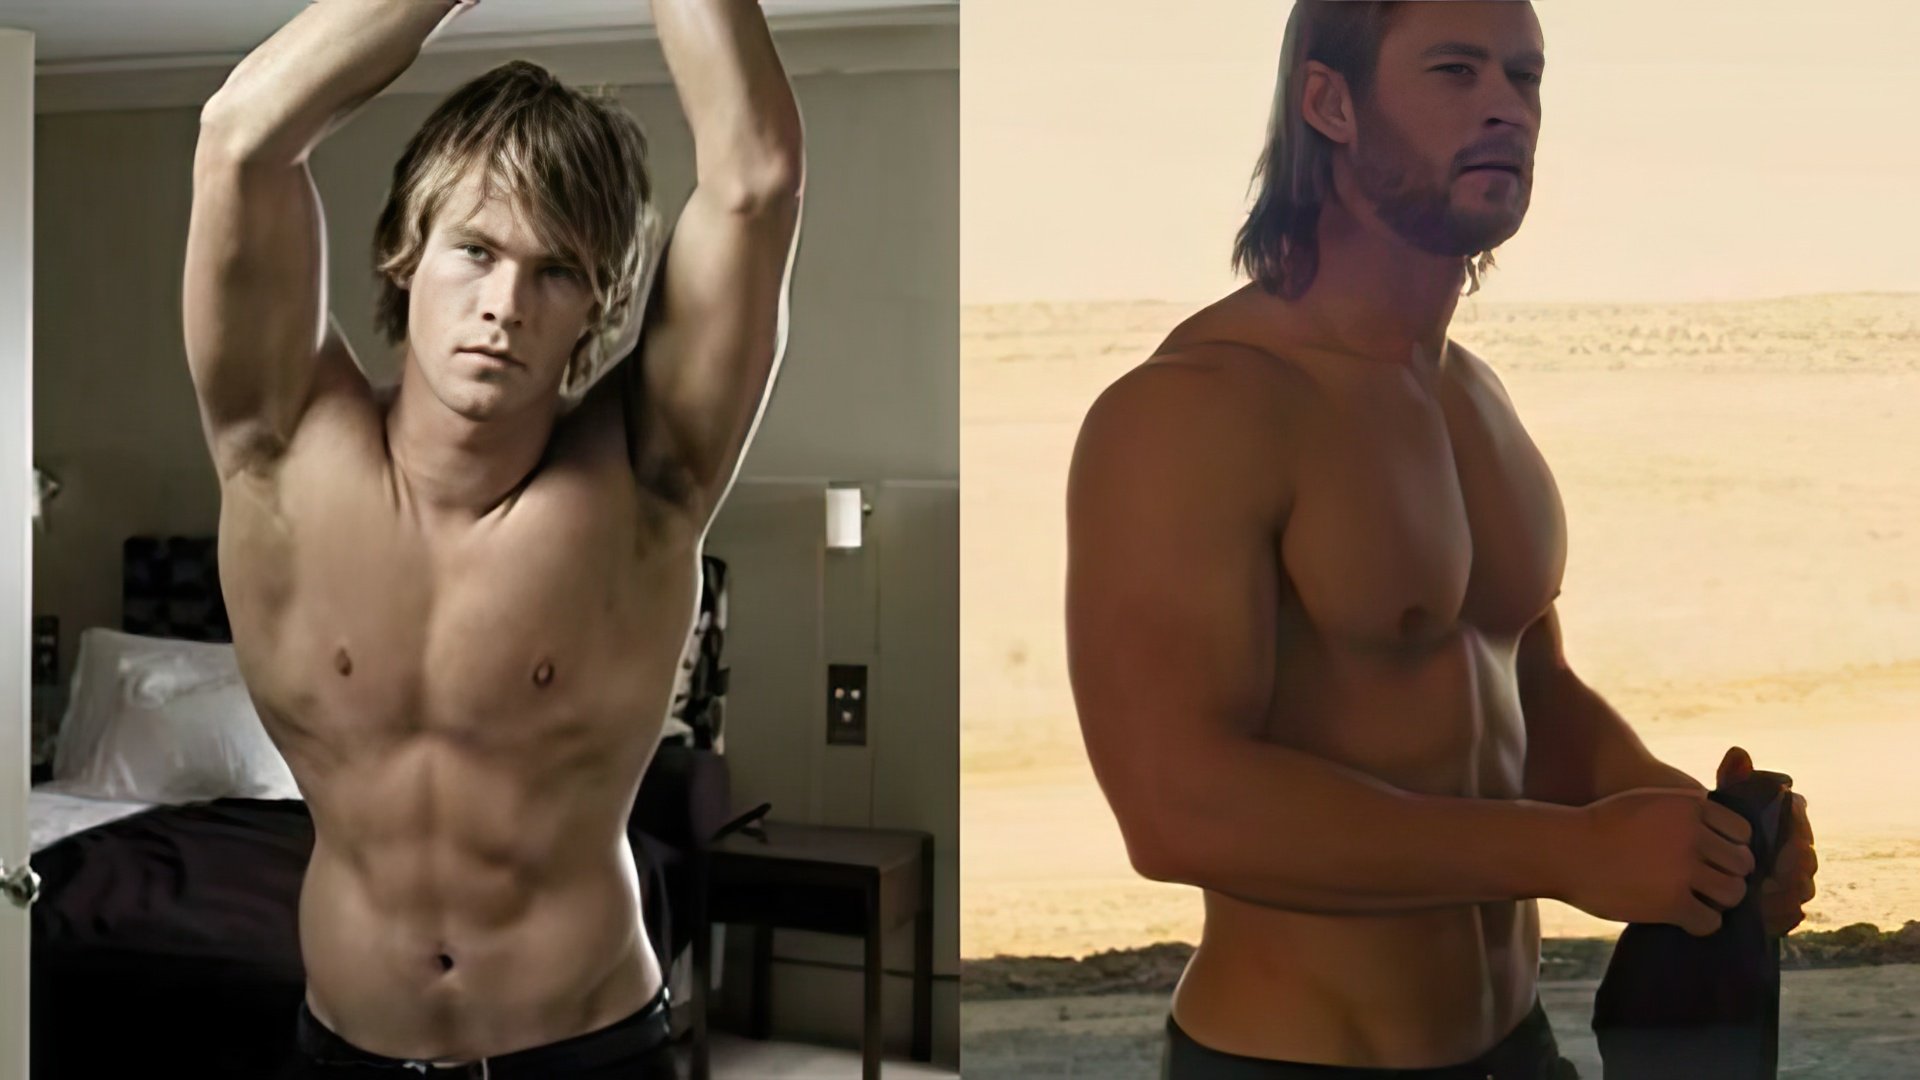 Chris Hemsworth trained a lot before filming in Thor